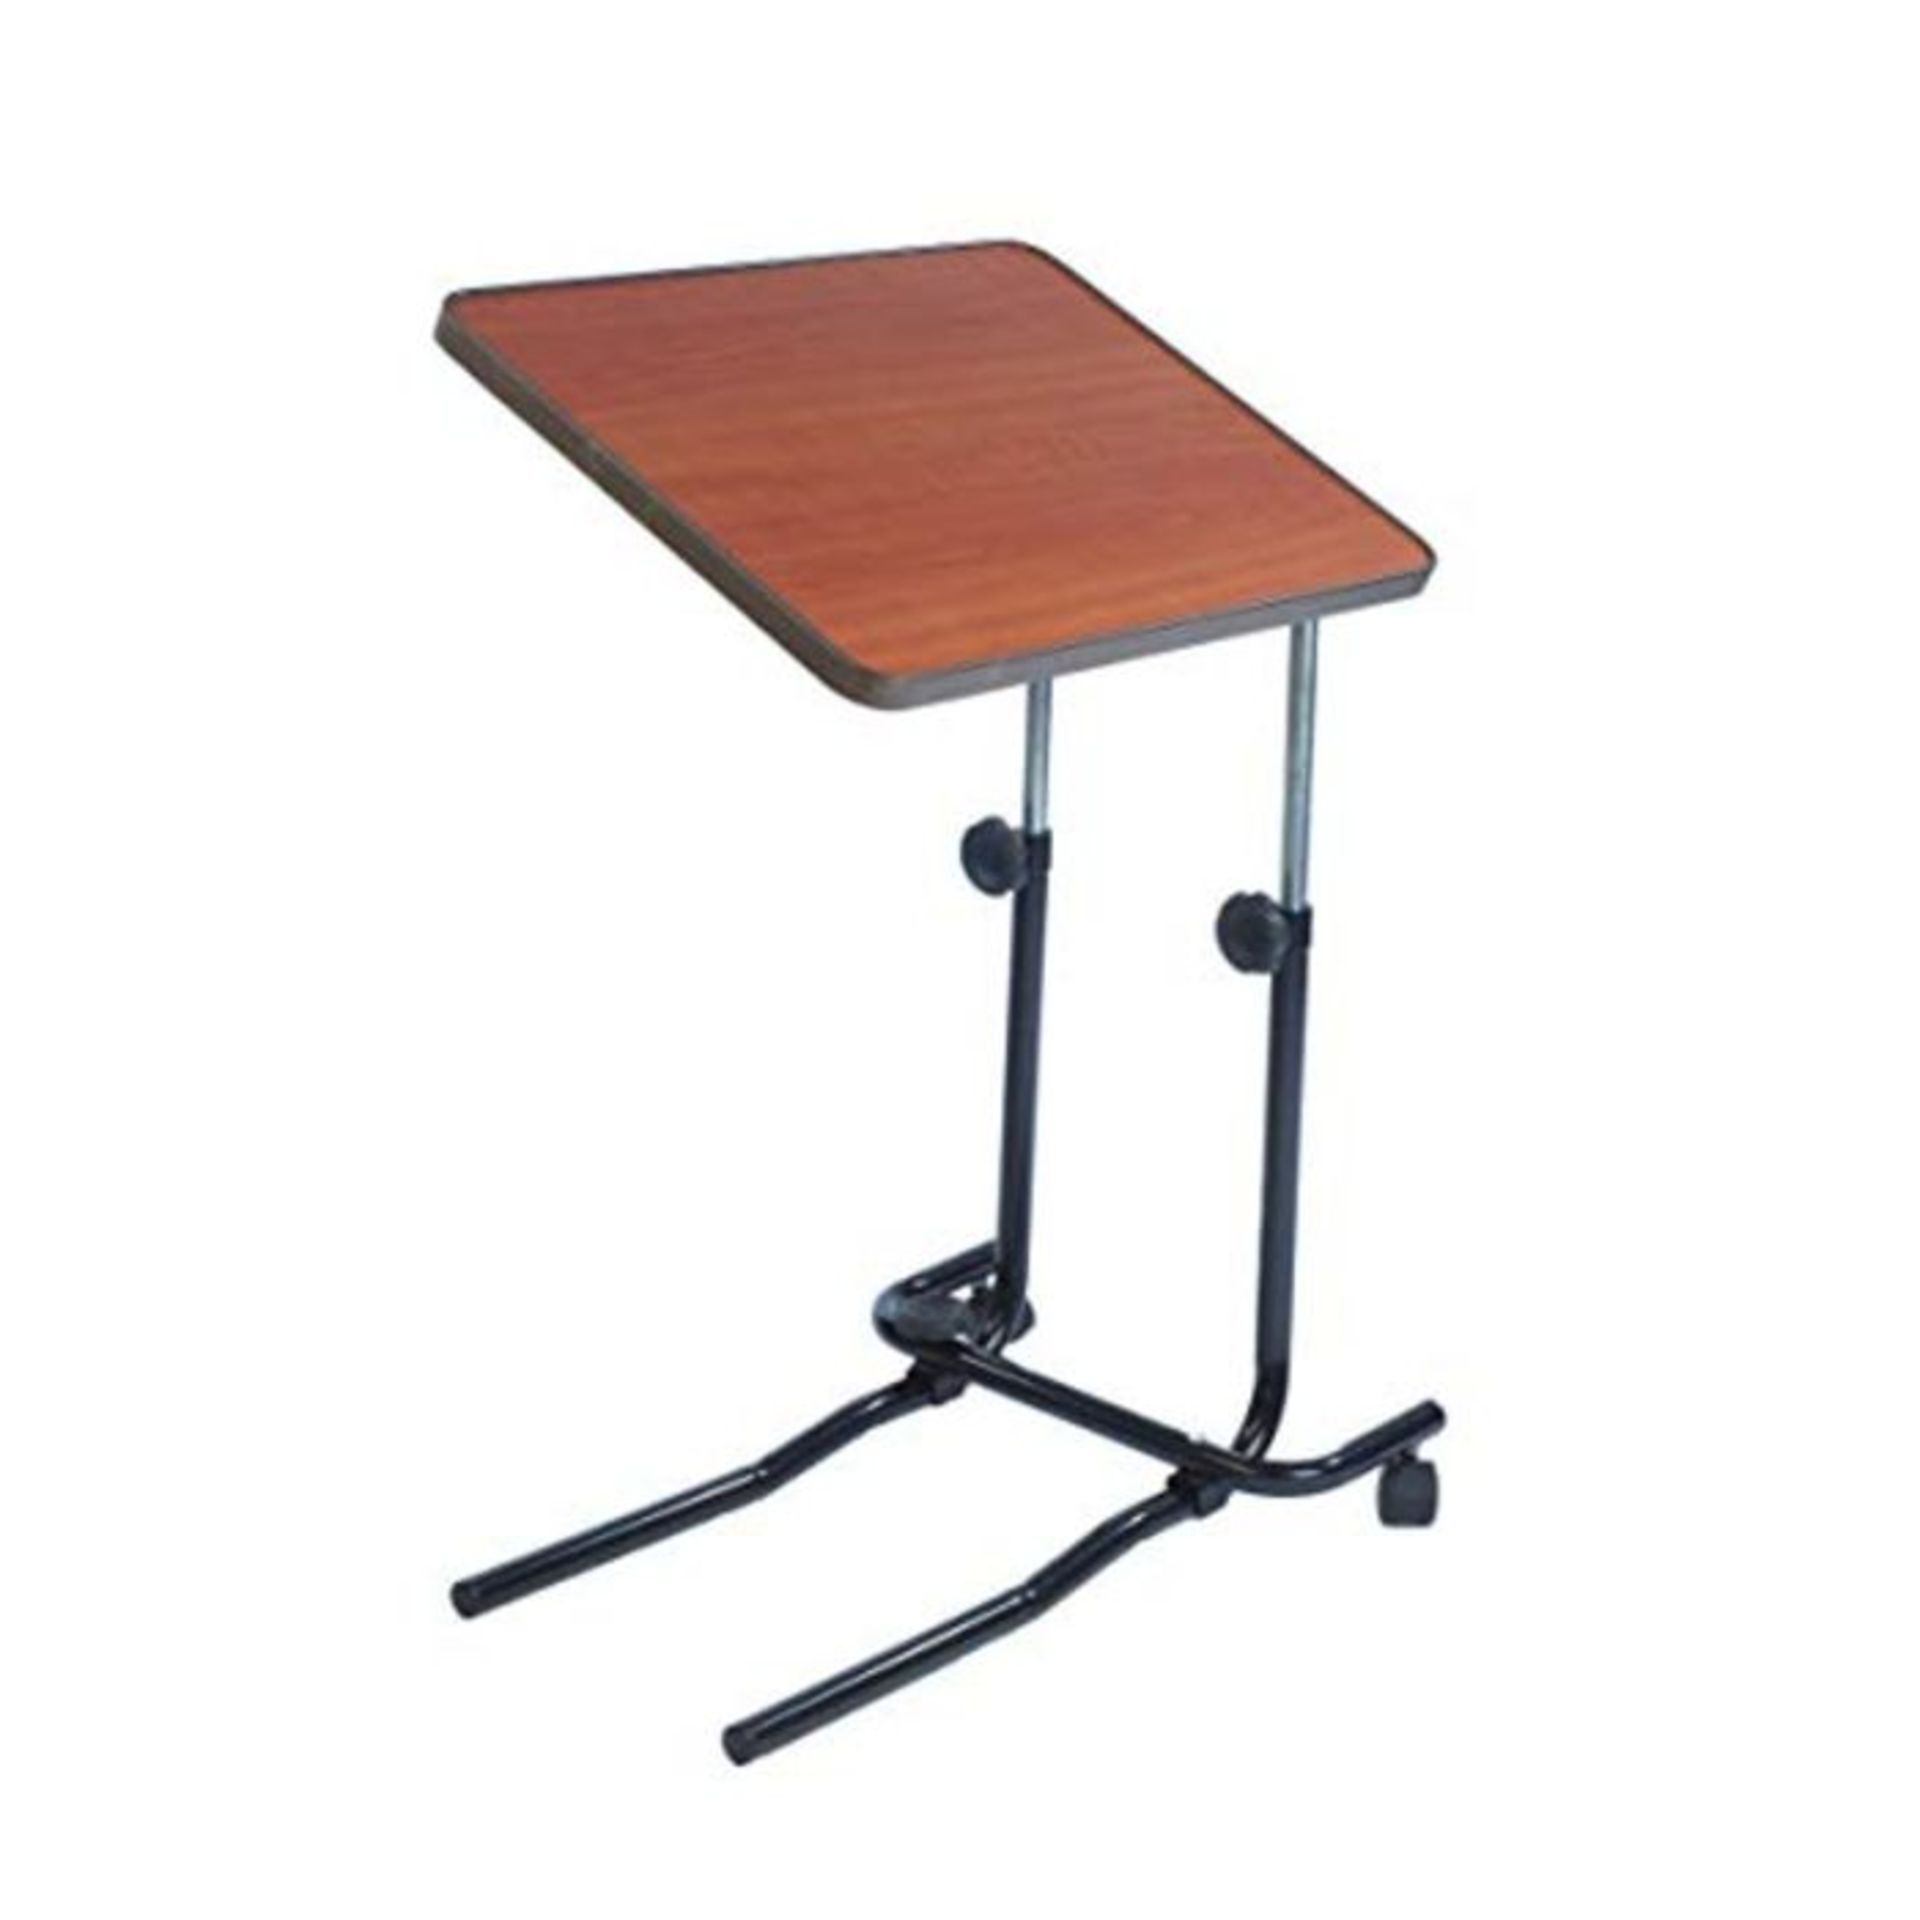 NRS Healthcare M01278 Overbed and Chair Table - Divan Style, Tiliting and Adjustable